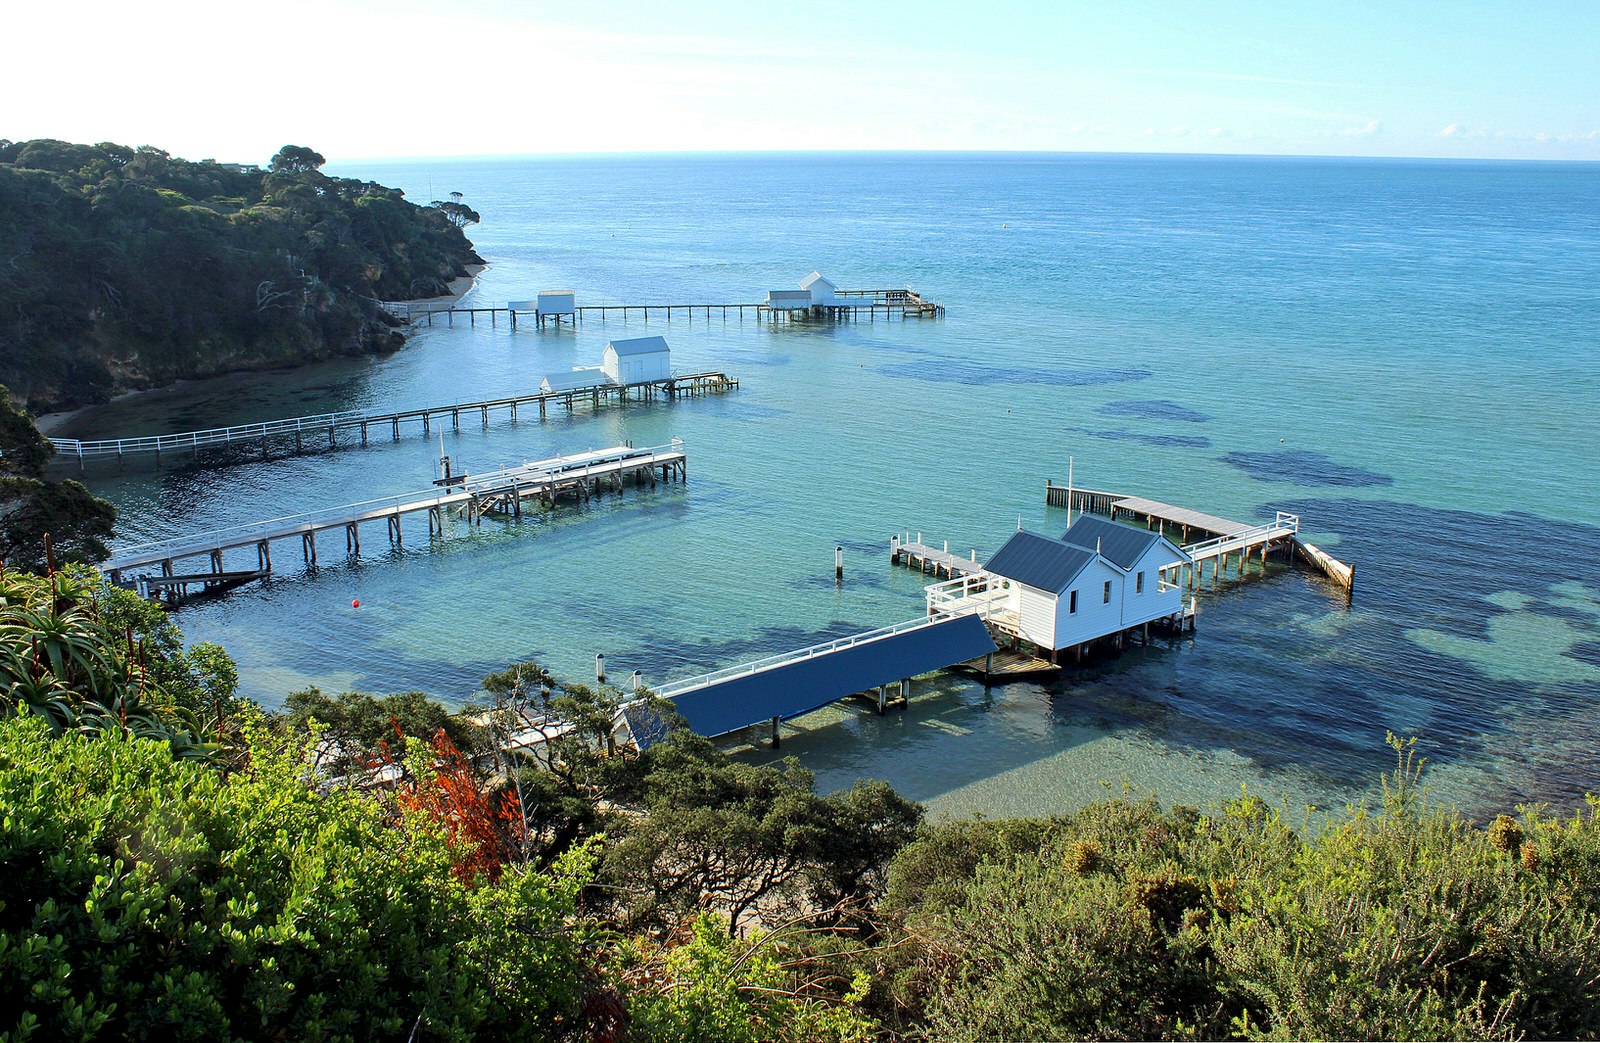 Sea view at Millionaires Walk, Artists Trail, Sorrento, Mornington Peninsula. Long promenades lead to private white houses on stilts above the sea. 